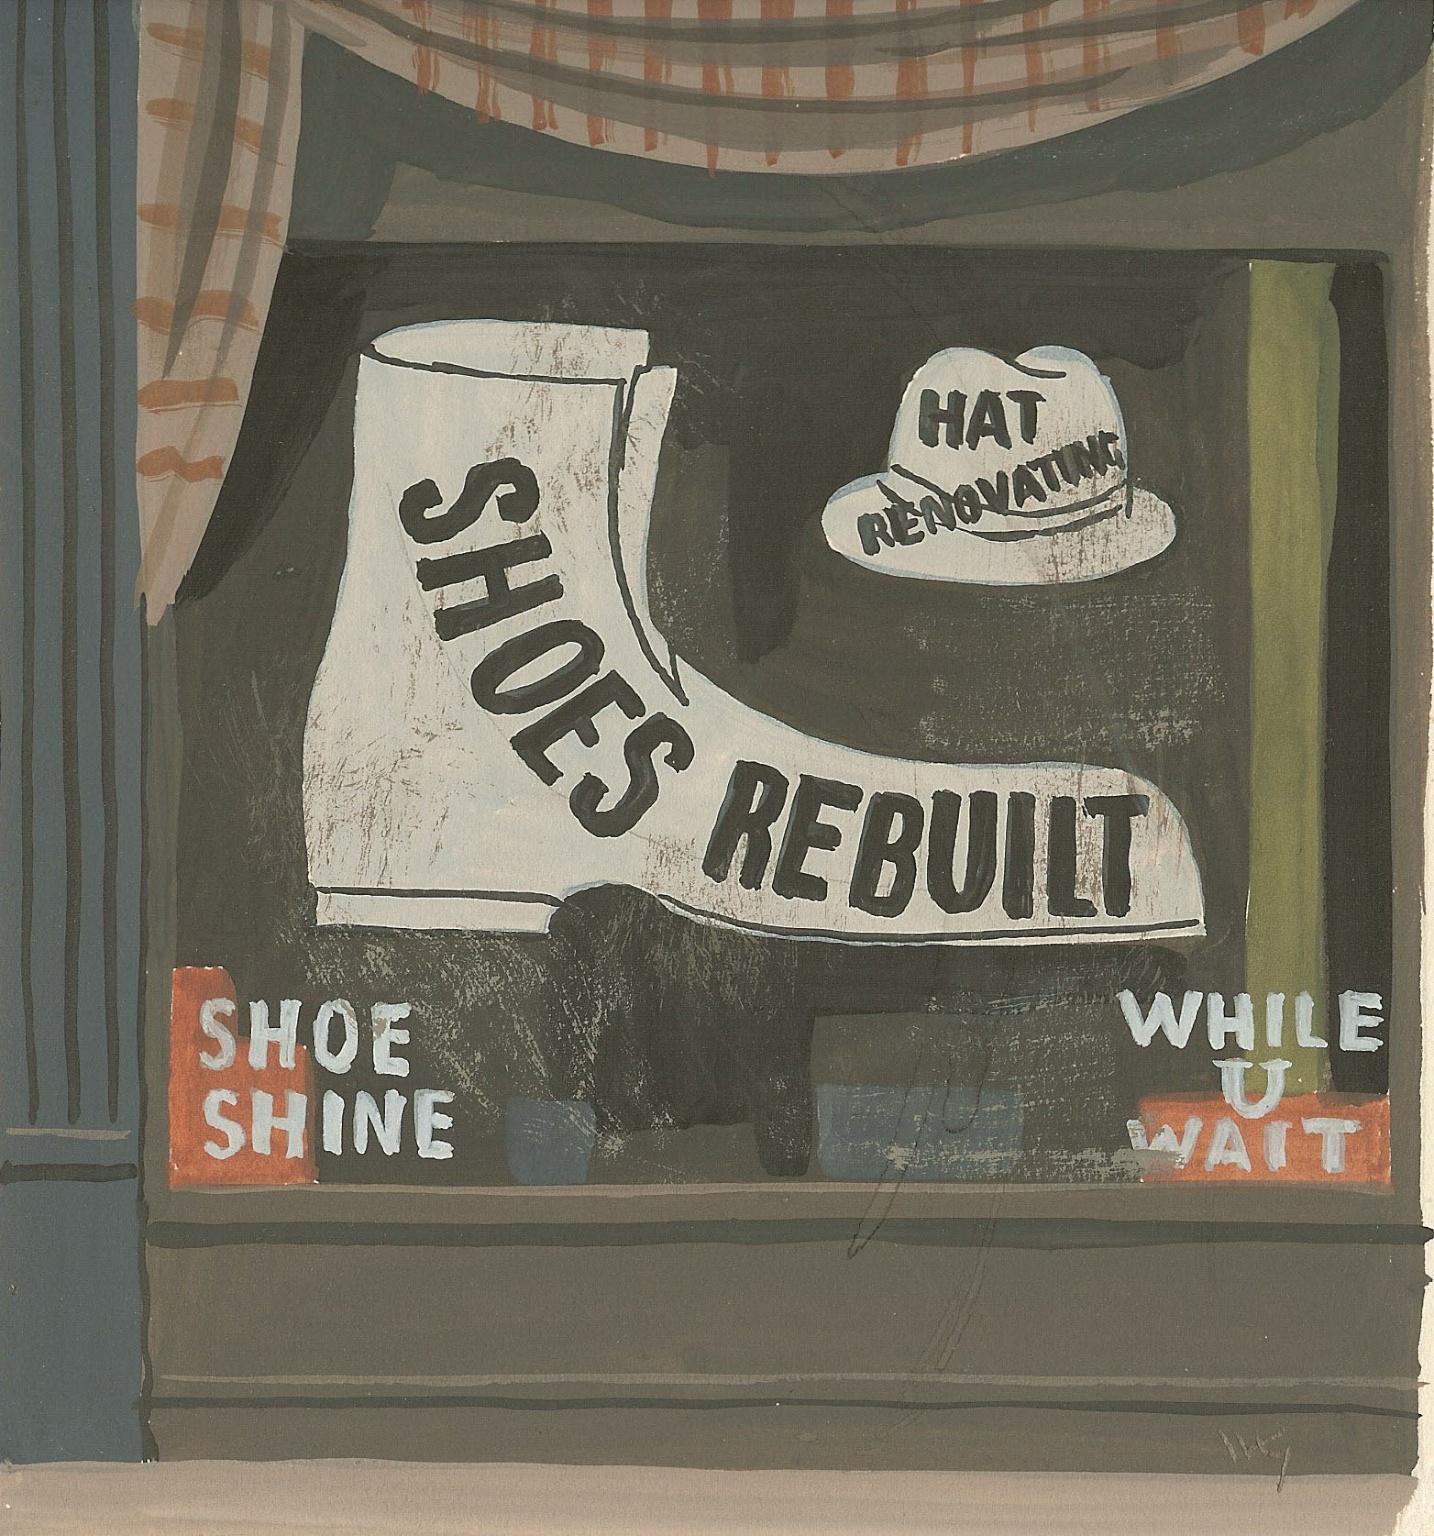 This gouache, by Witold Gordon, is one of a series commissioned by Condé Nast which were published in Vanity Fair magazine in July 1934 under the banner “New York Shops You Never See.” Measures: Framed to 9